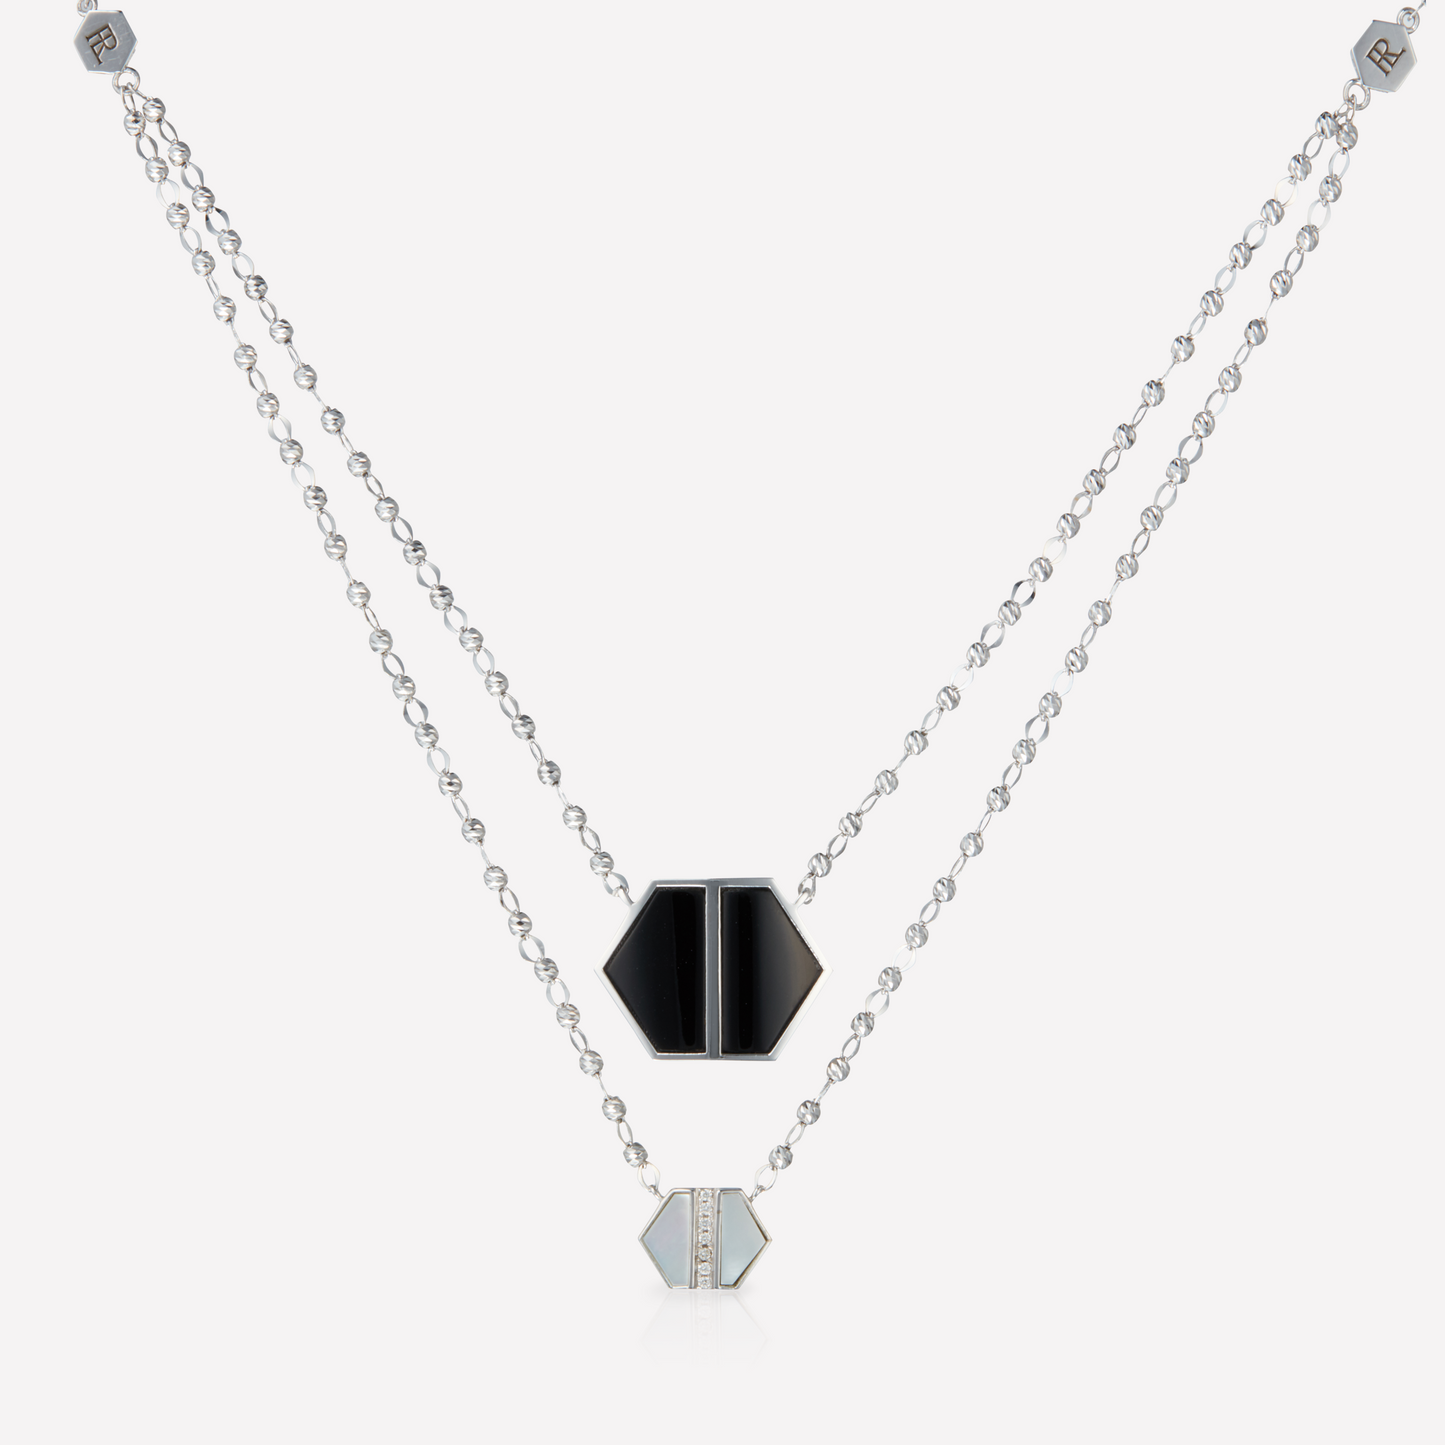 VOID Filled By You Necklace, Large, Black Spinel, Diamond S